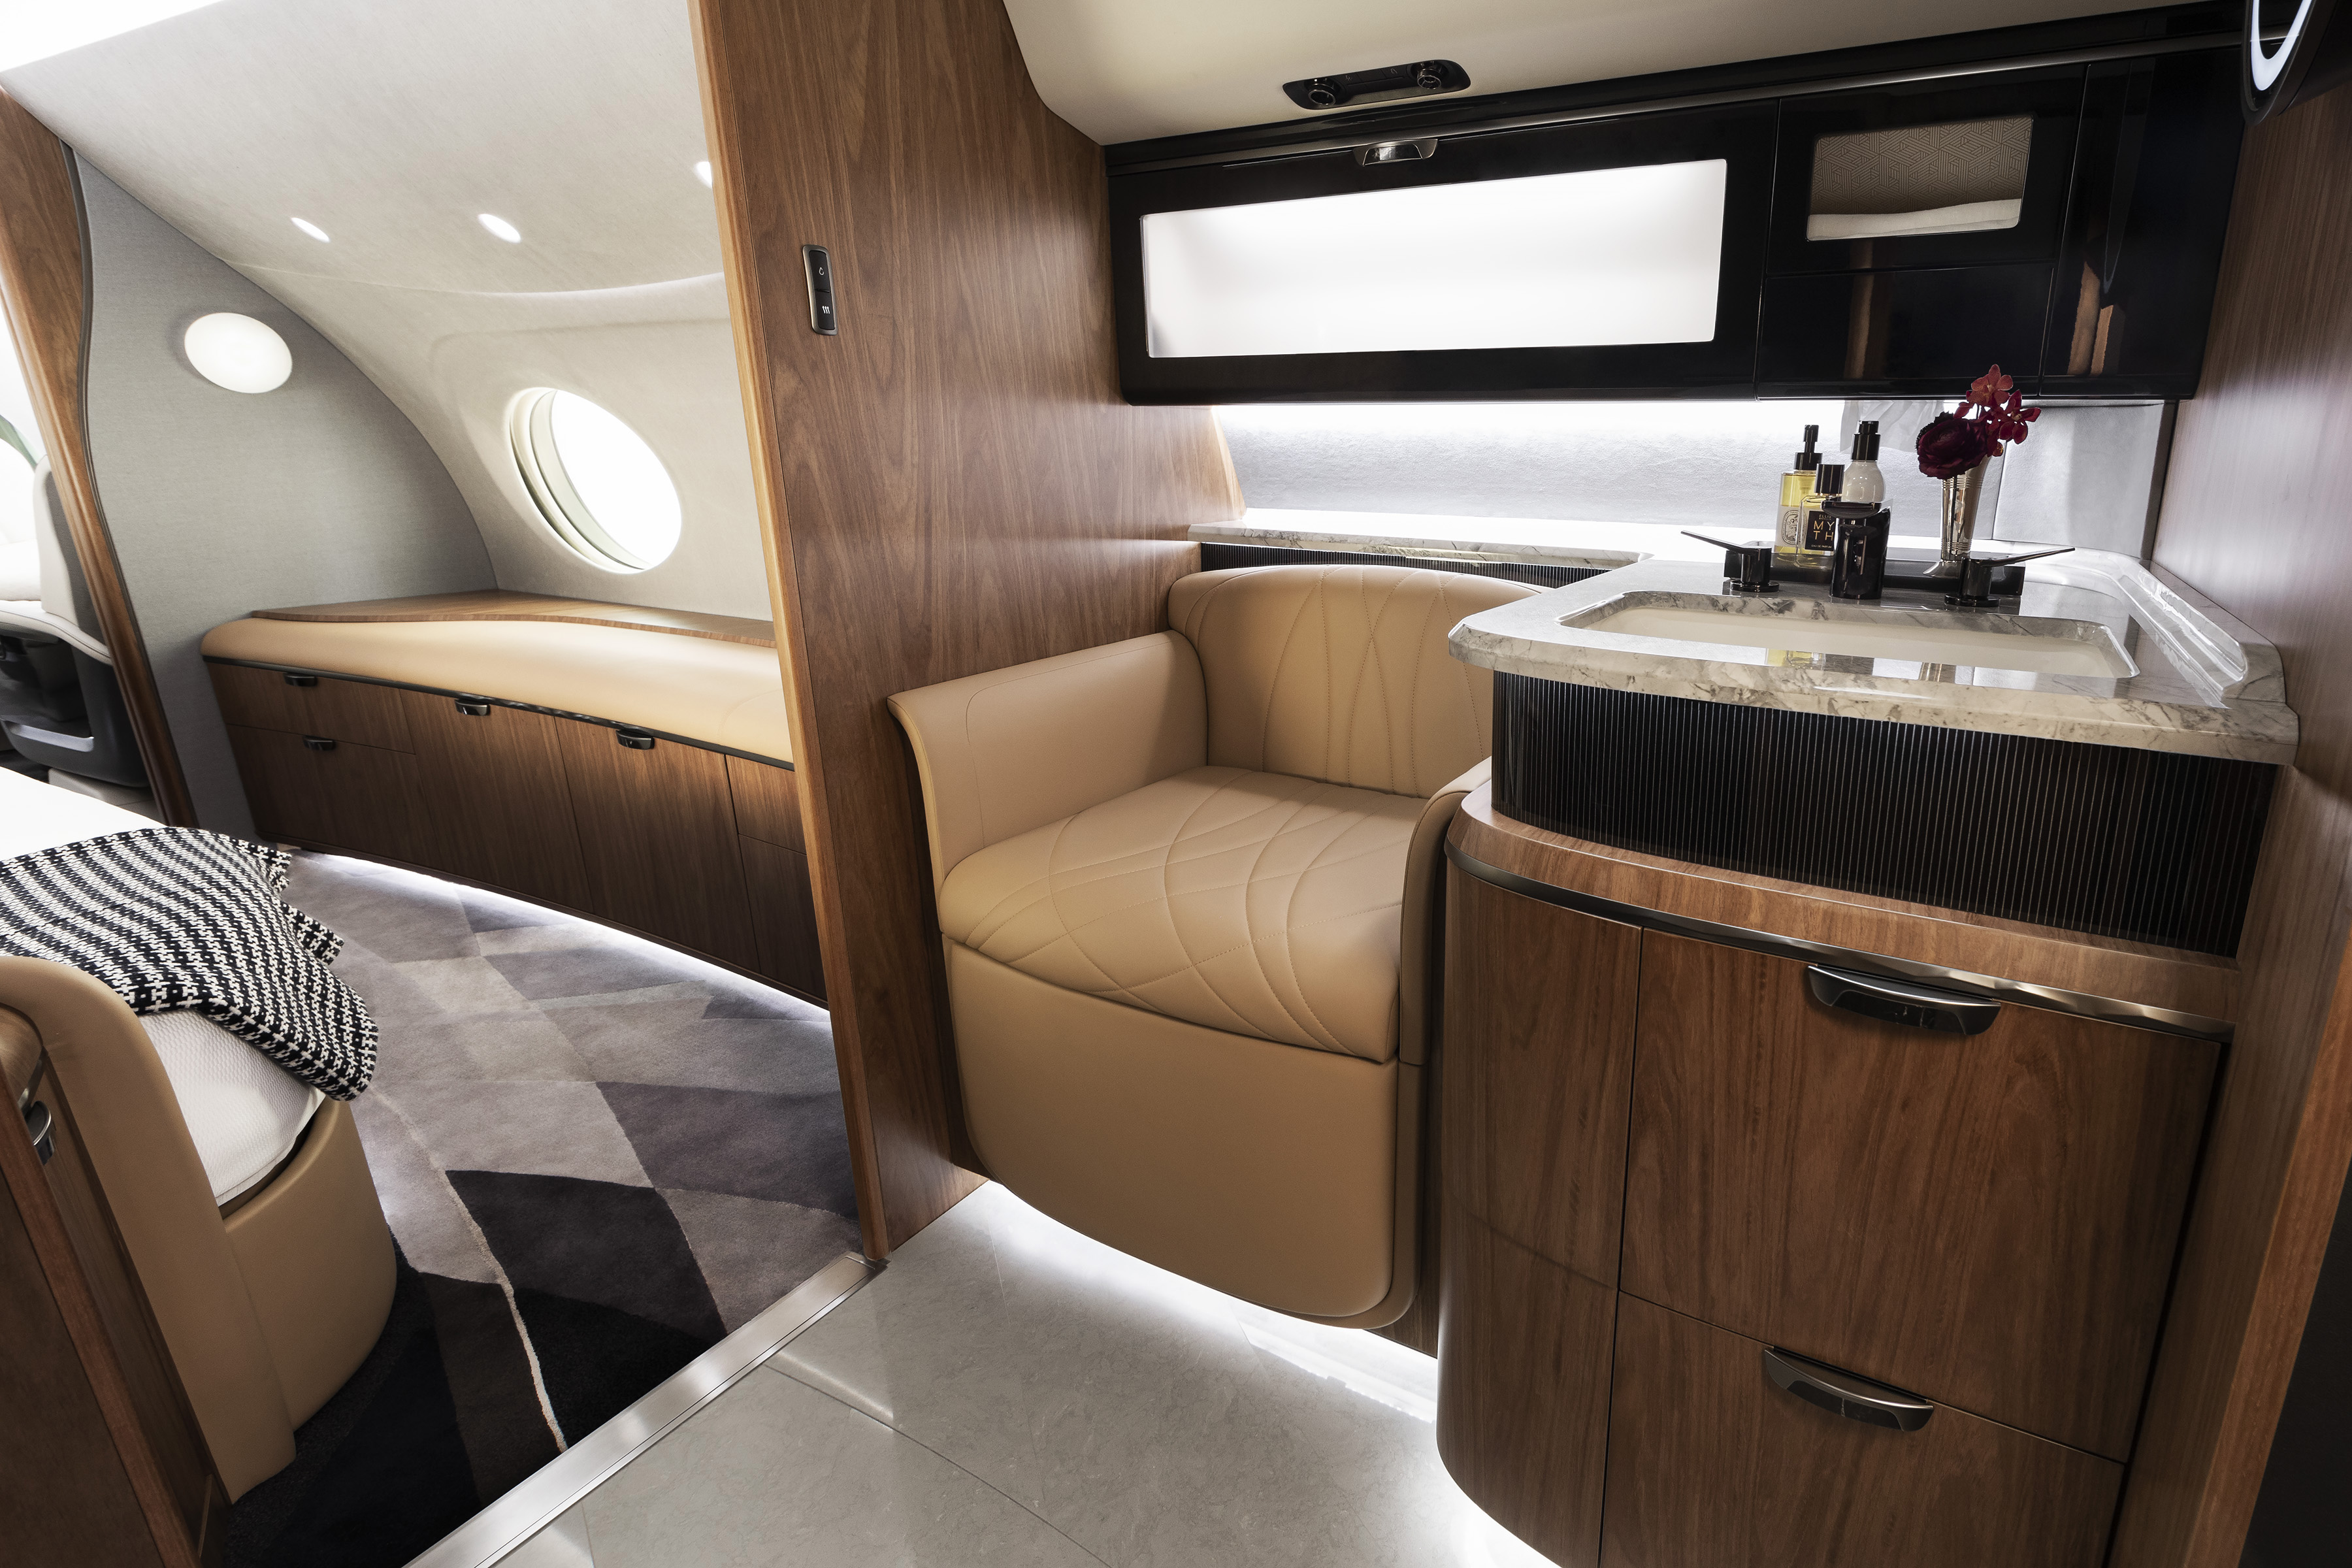 Gulfstream Unveils New G700 Flagship At Nbaa Bace Aviation